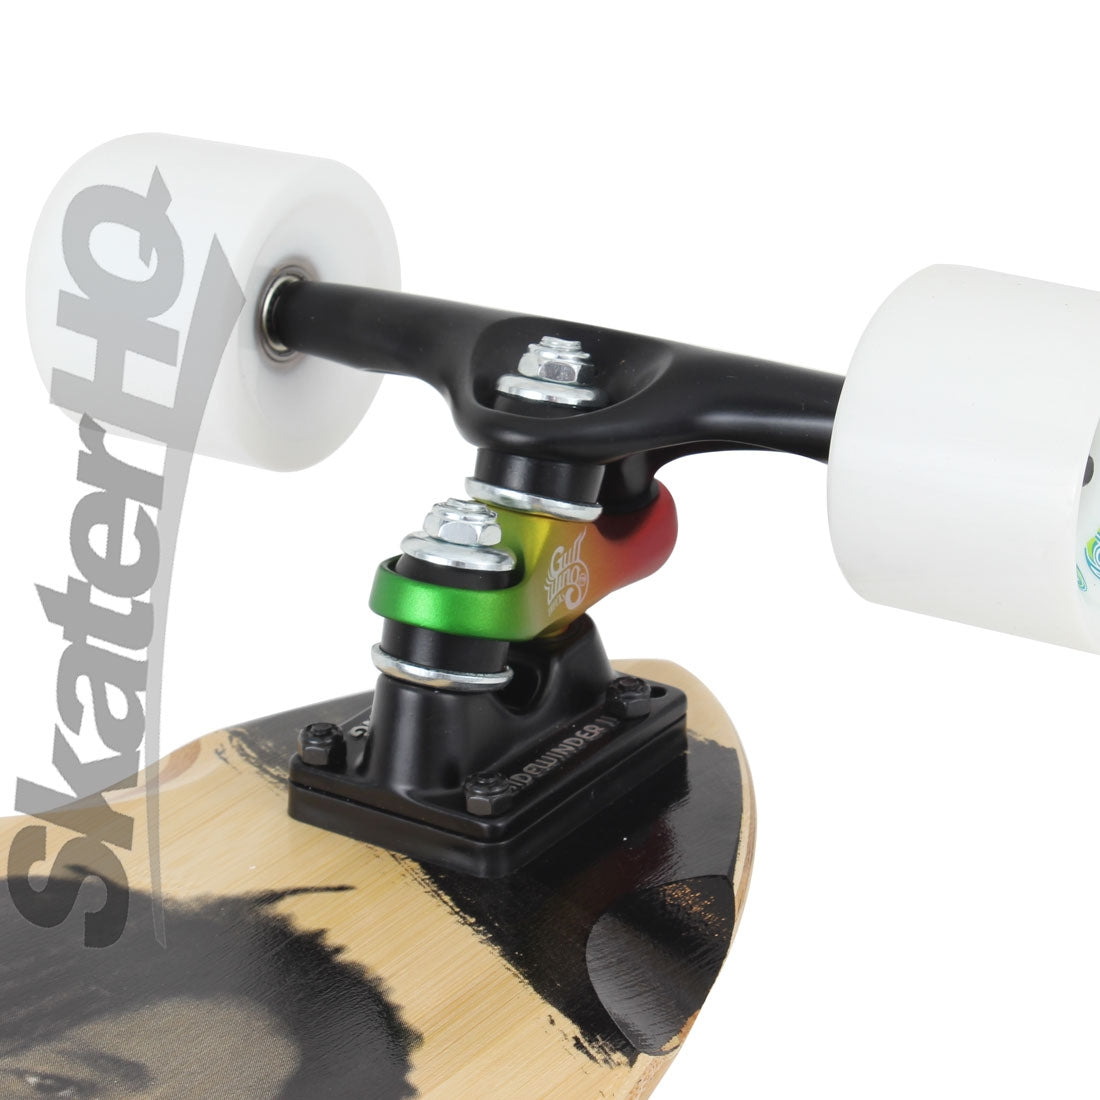 Sector 9 Small Axe Bamboo Longboard Complete Skateboard Completes Longboards